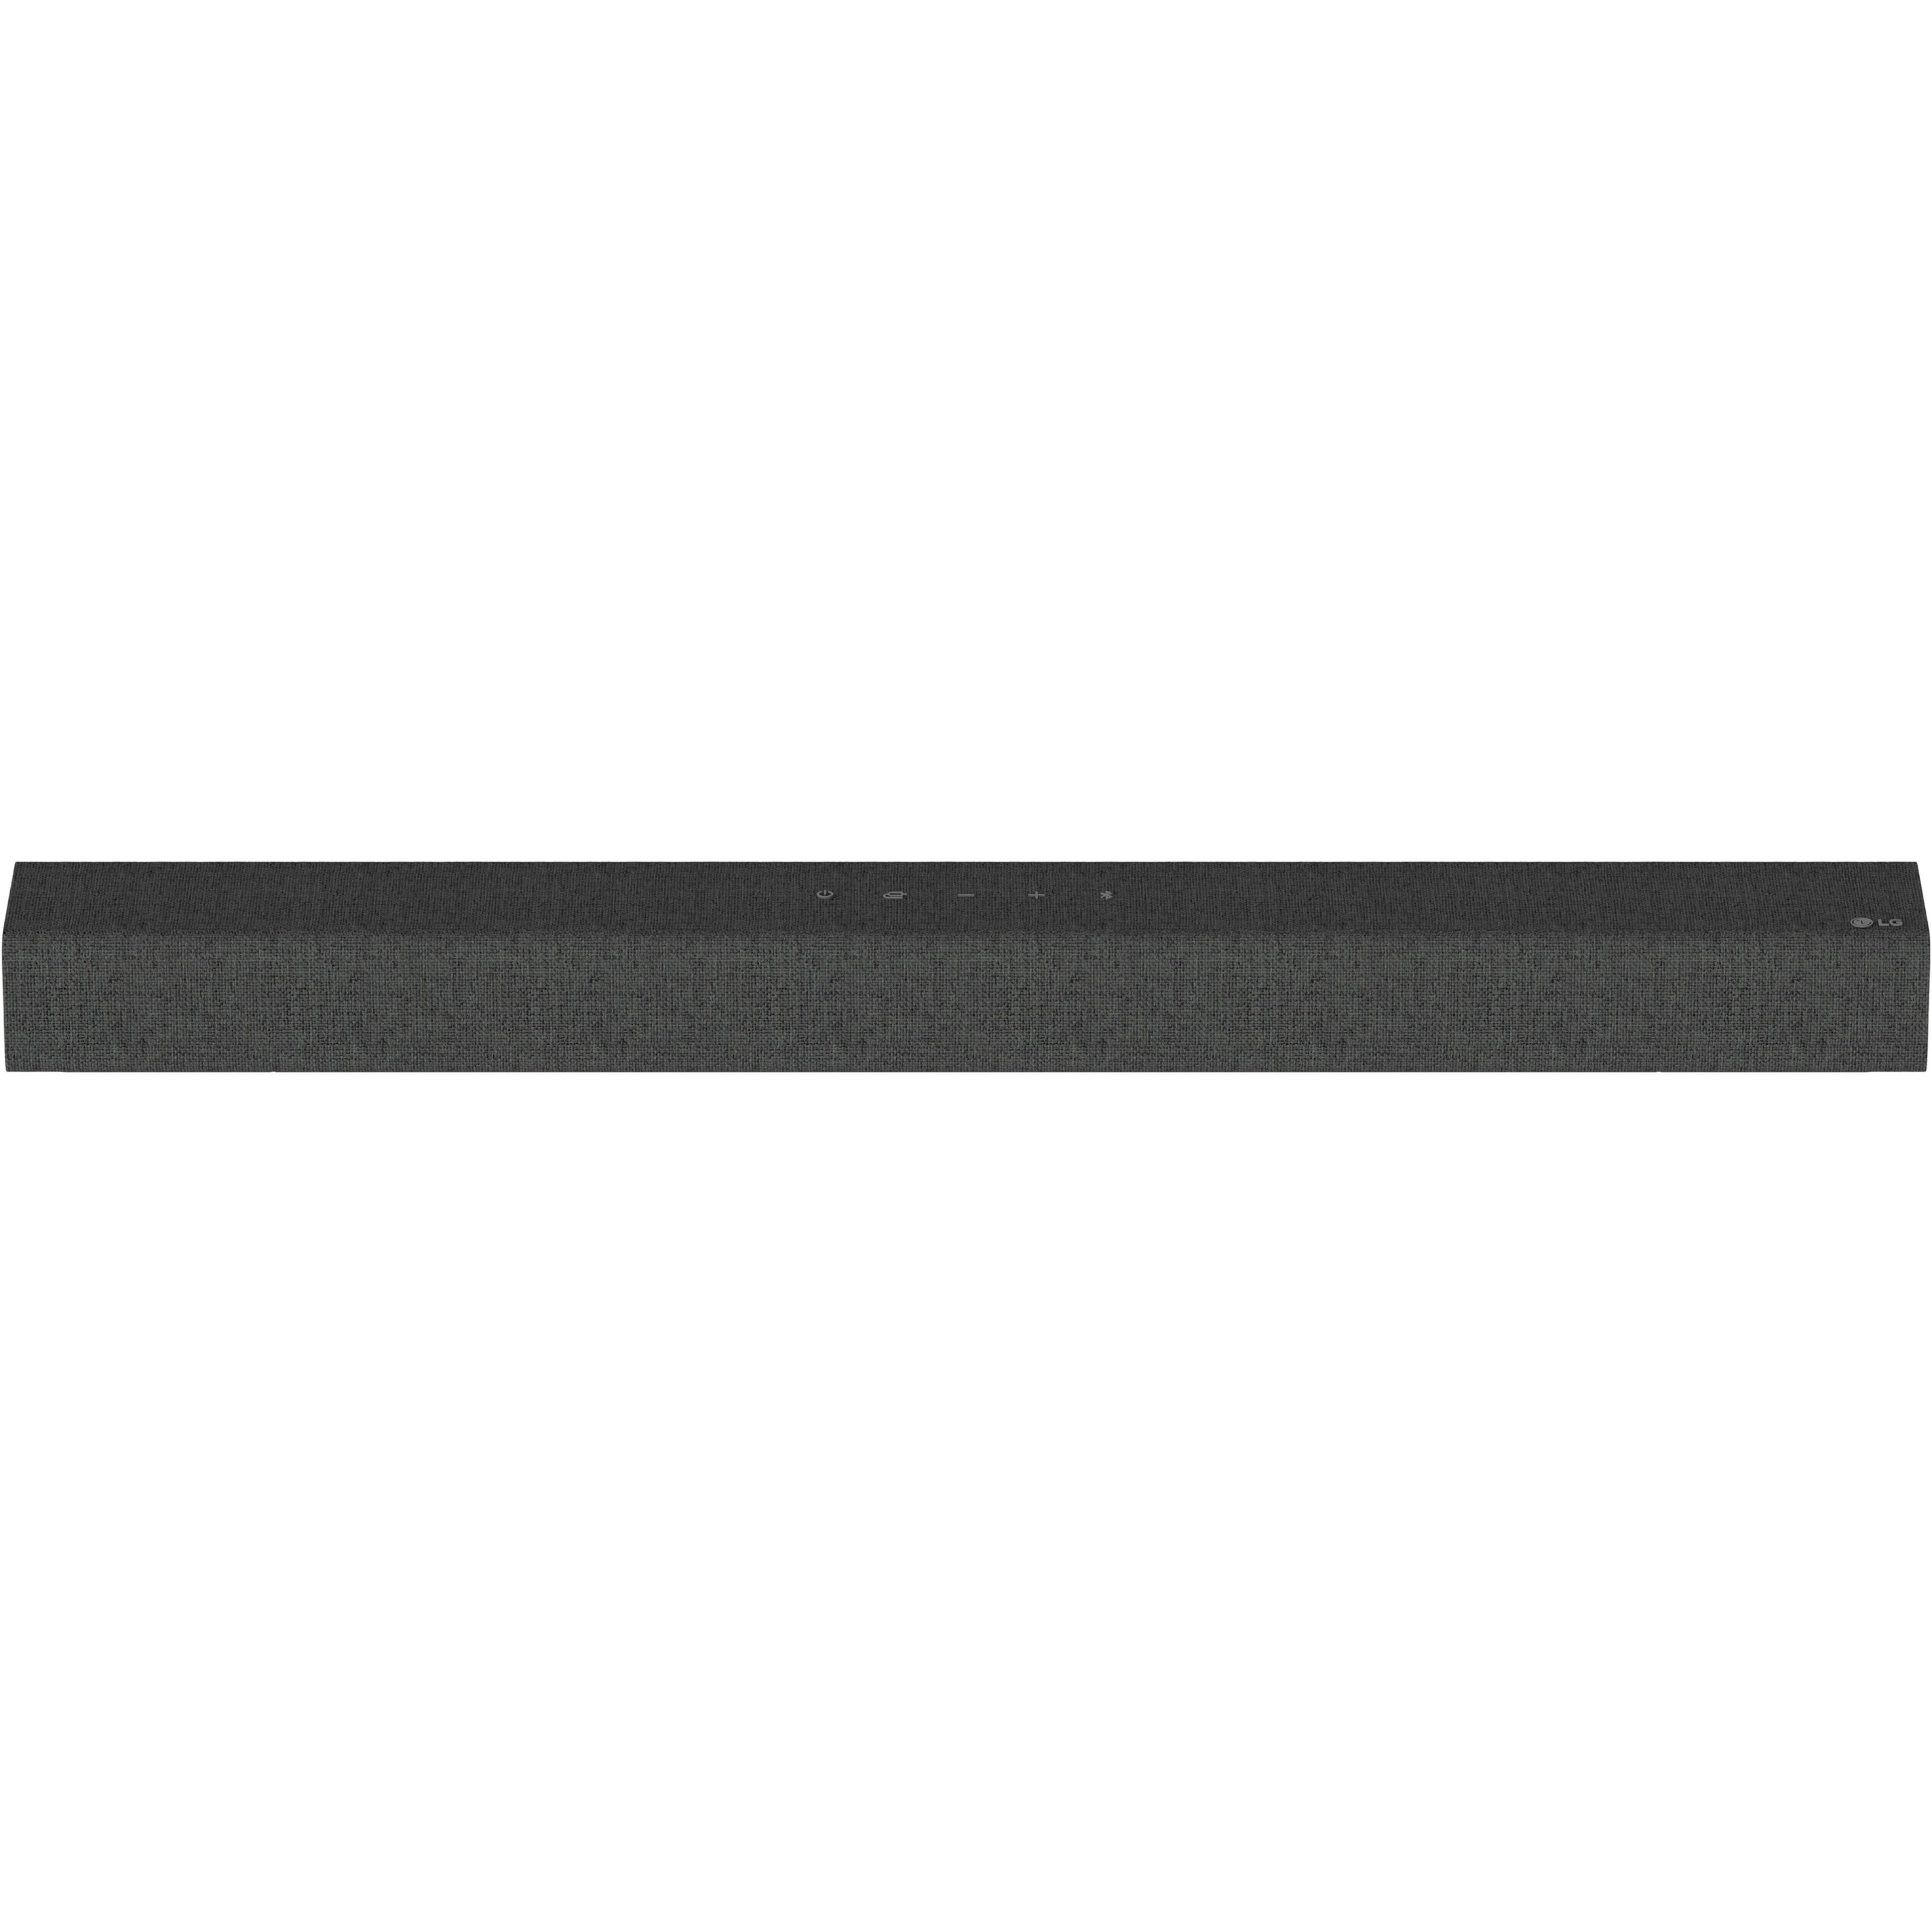 LG SP2 2.1 Channel Sound Bar with Built-In Subwoofer, 100W RMS, Dark Gray